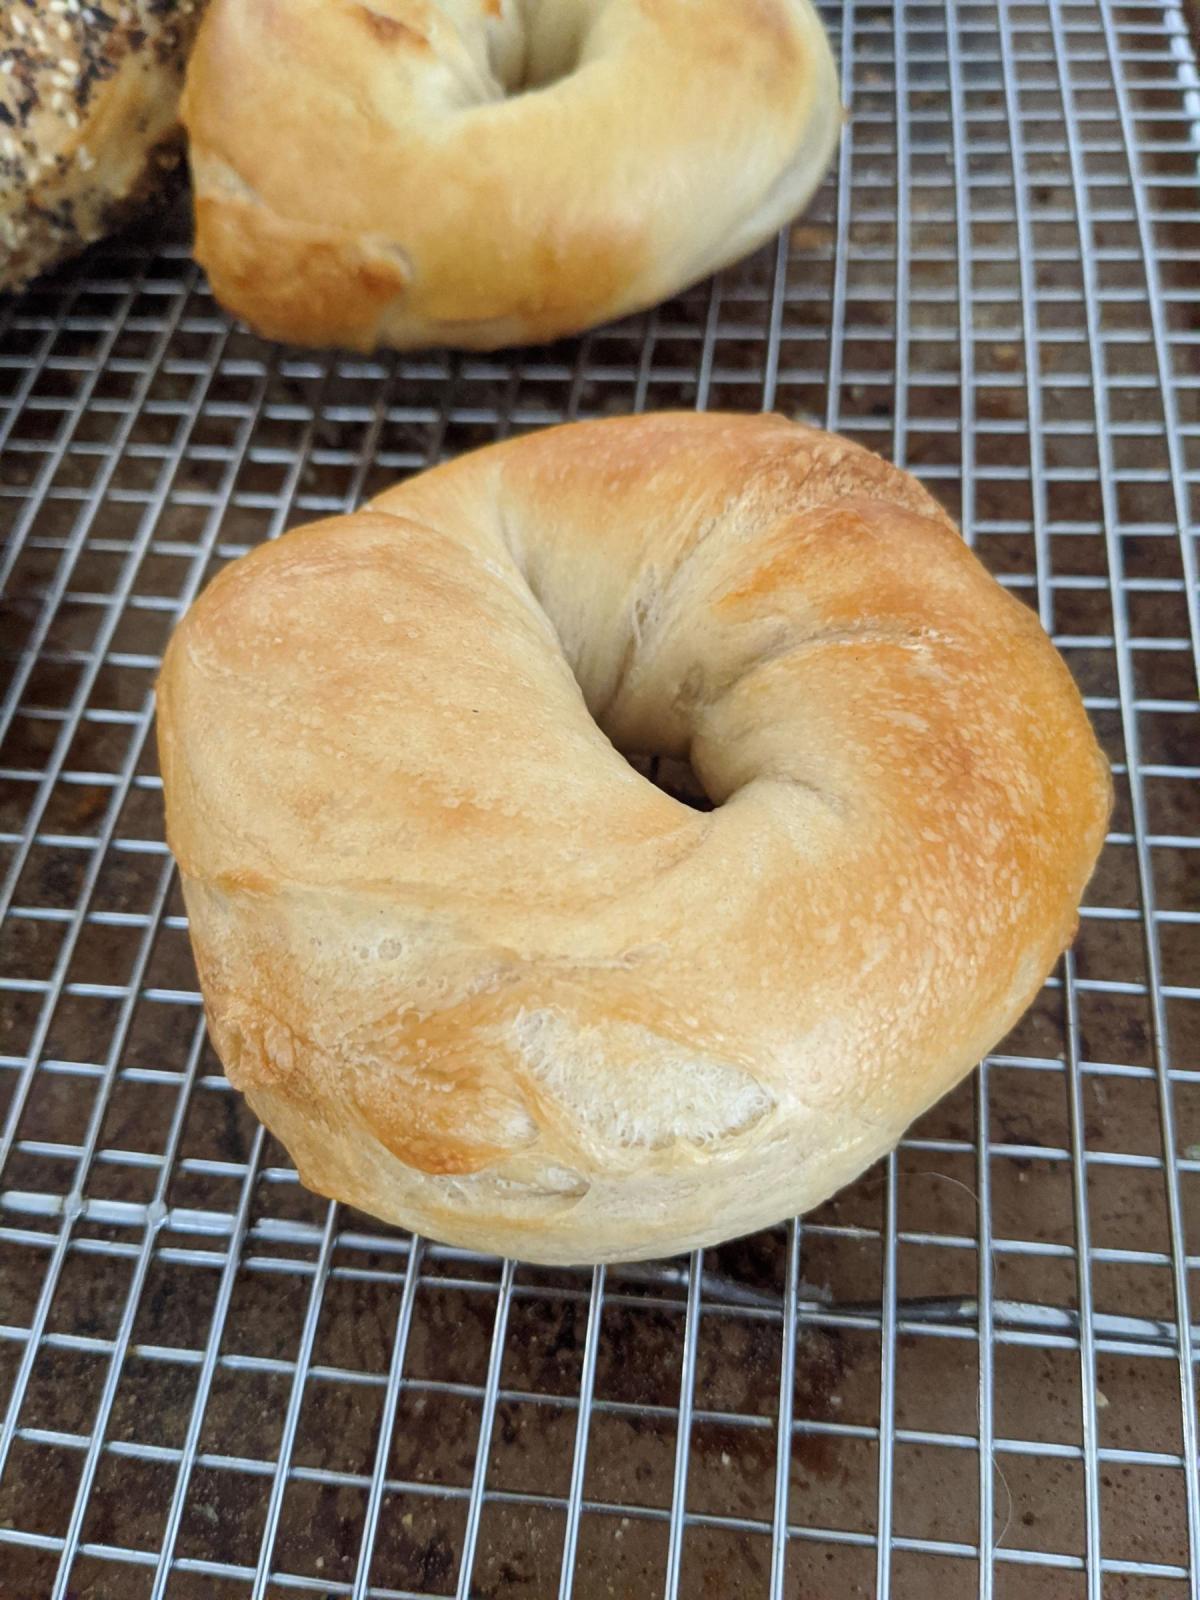 Re-rolled Bagel